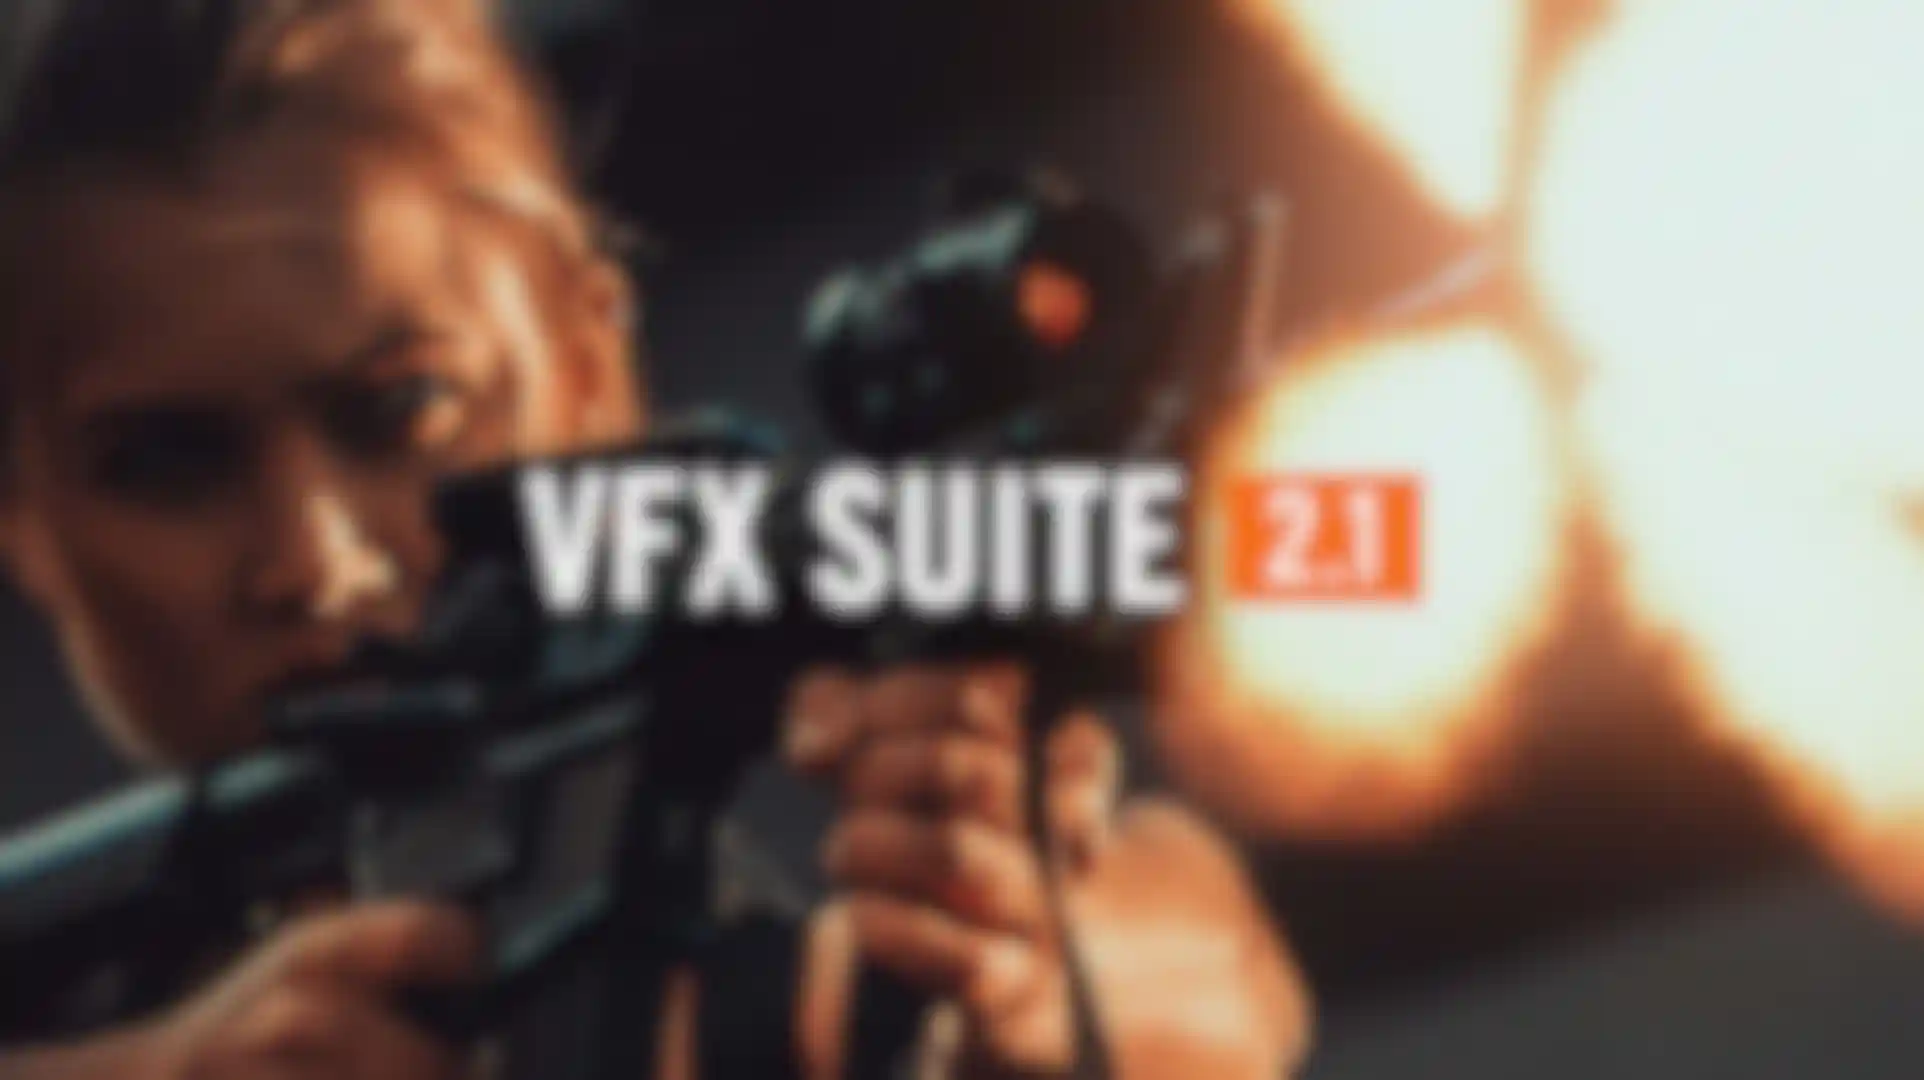 VFX Suite 2.1 Now Available image